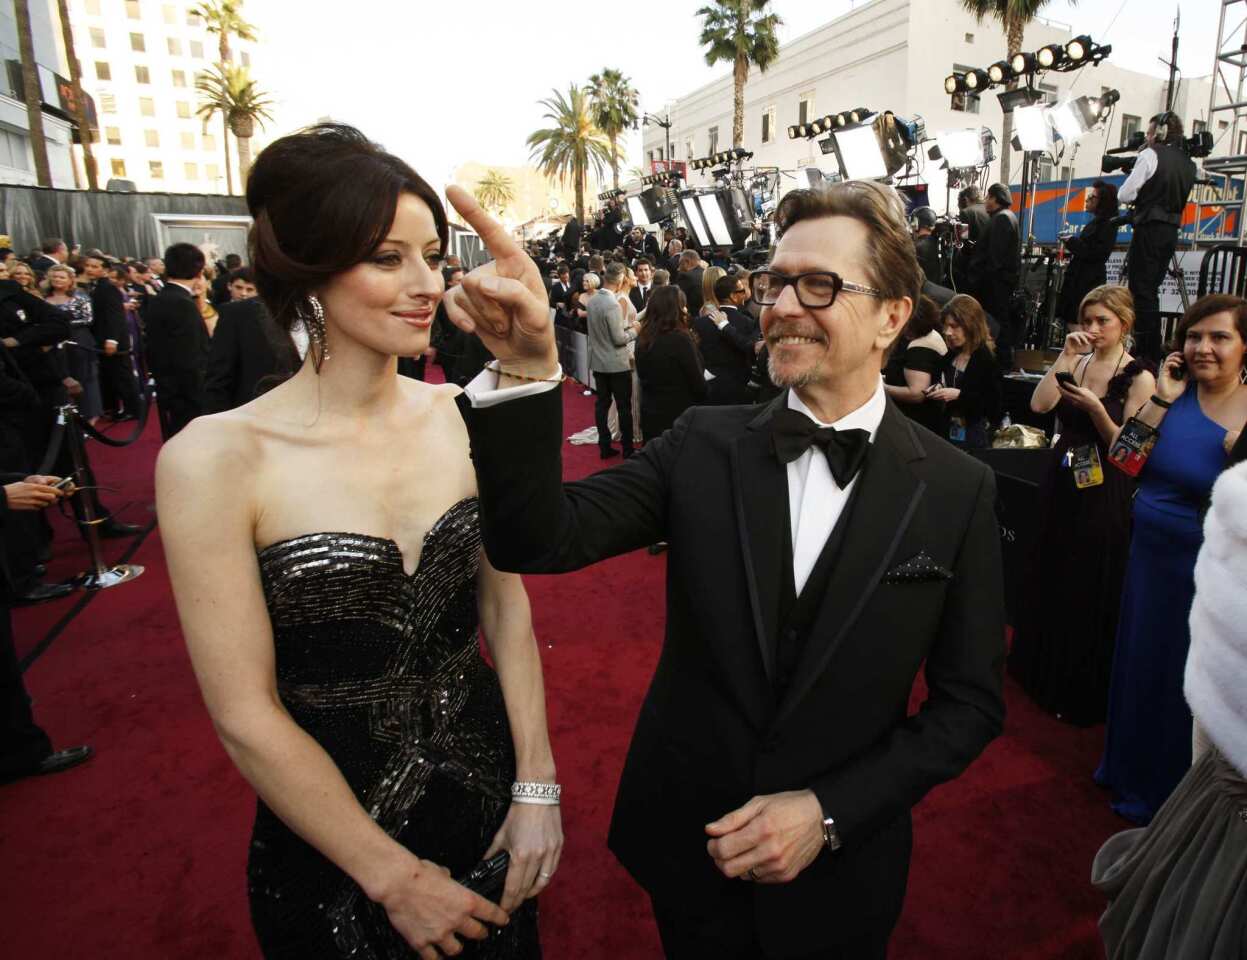 Gary Oldman, nominated for his performance in "Tinker Tailor Soldier Spy," spoke of working with such famous source material. The film is based on one of John le Carre's most well-known novels. "It was indeed a challenge," said Oldman. "But books and scripts and directors and fellow actors don't come along like this very often. Maybe this is it. I hope there's some more exciting things down the line for me, but this was truly a harmonic thing." Of an Oscar nomination, he said it is "the bee's knees."